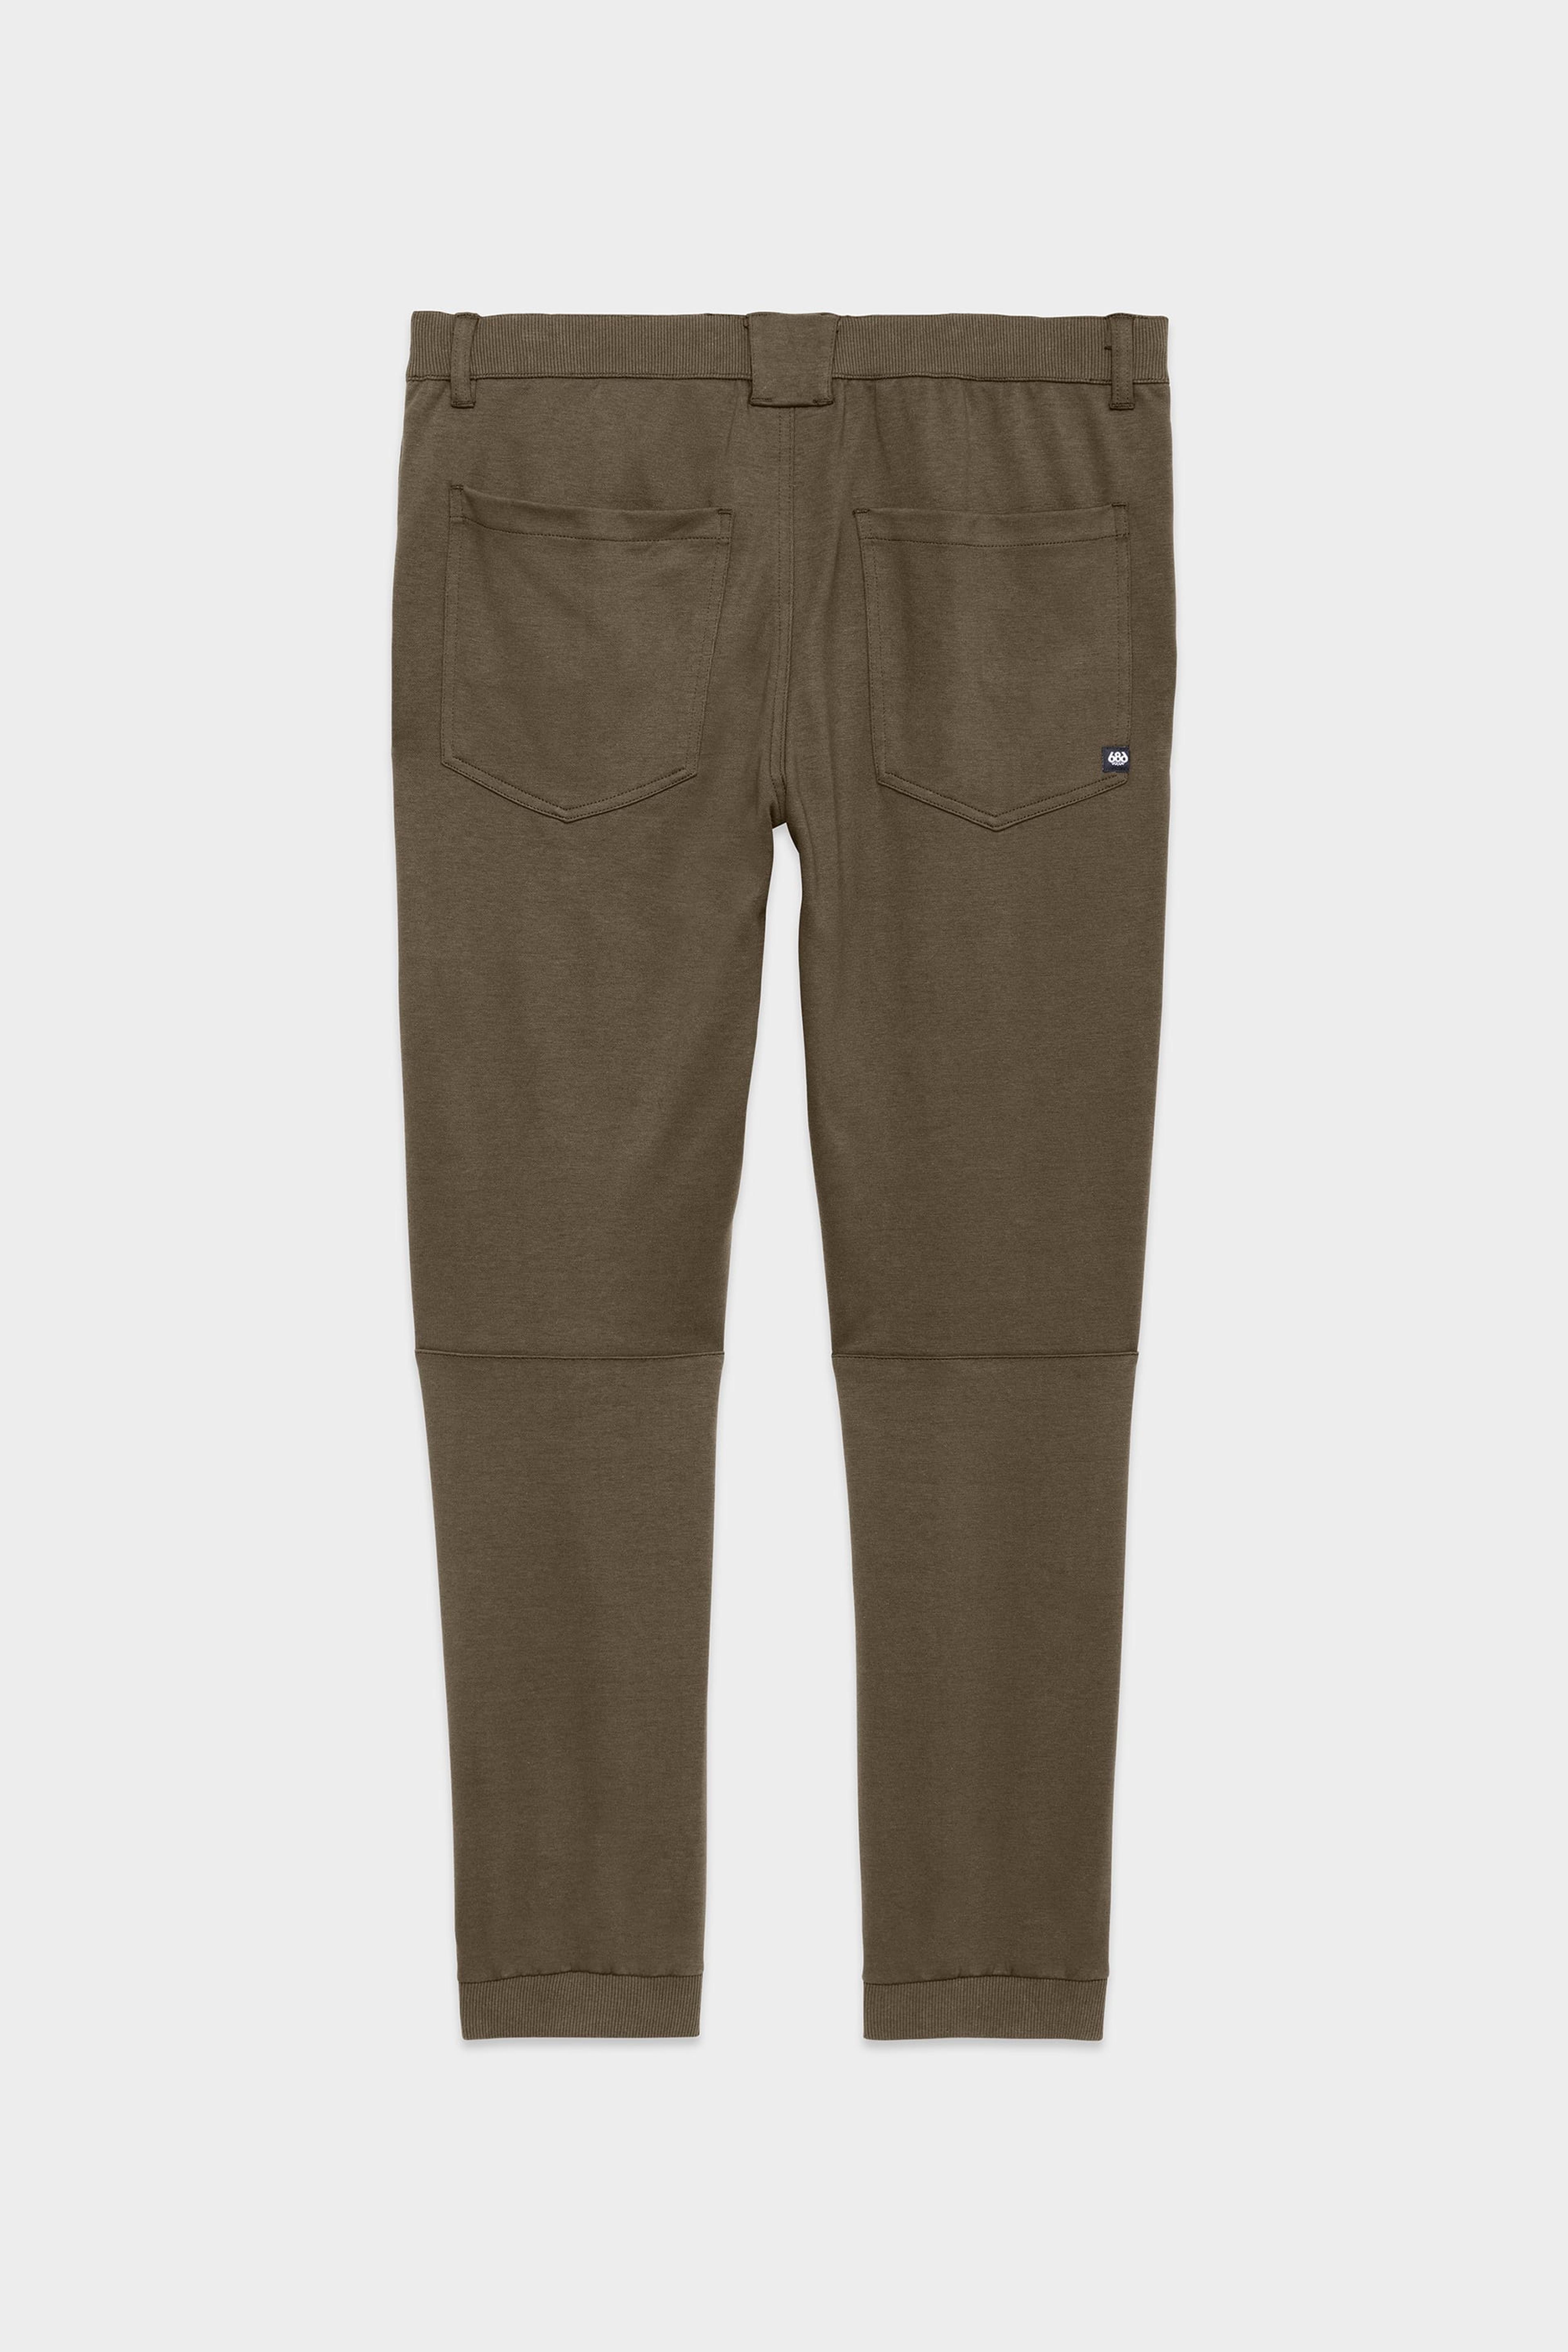 Alternate View 48 of 686 Men's Everywhere Double Knit Pant